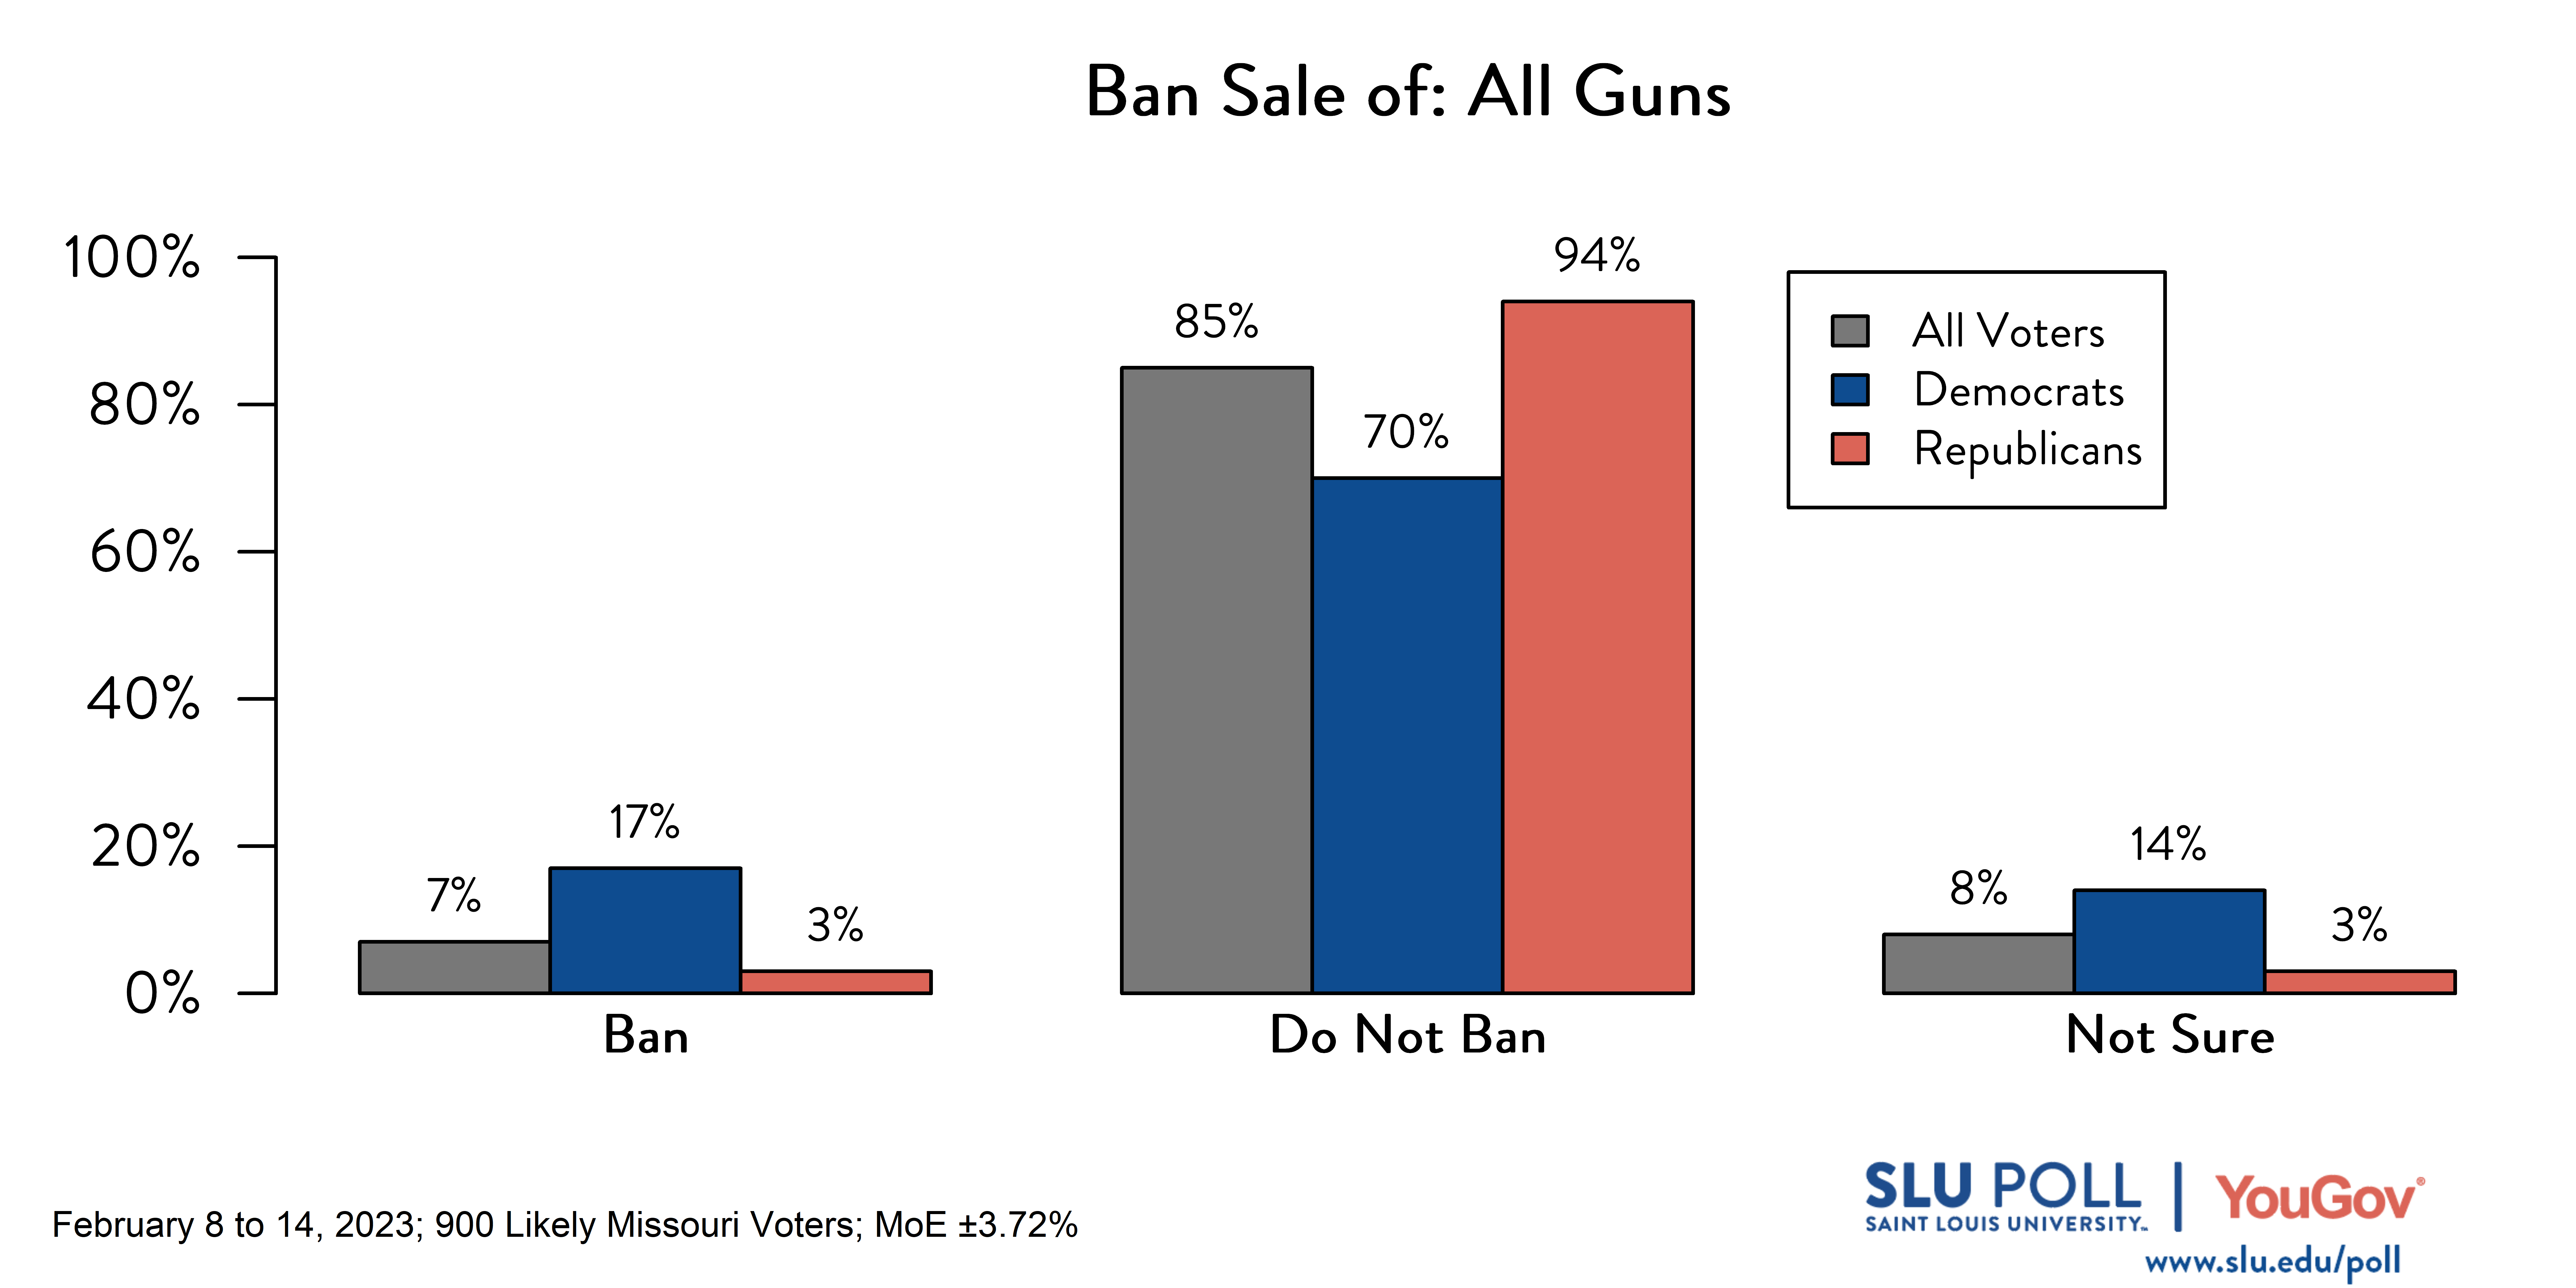 Likely voters' responses to 'Do you support banning the following gun-related sales, except those that are issued to law enforcement officers: The sale of all guns?': 7% Ban, 85% Do not ban, and 8% Not sure. Democratic voters' responses: ' 17% Ban, 70% Do not ban, and 14% Not sure. Republican voters' responses: 3% Ban, 94% Do not ban, and 3% Not sure.